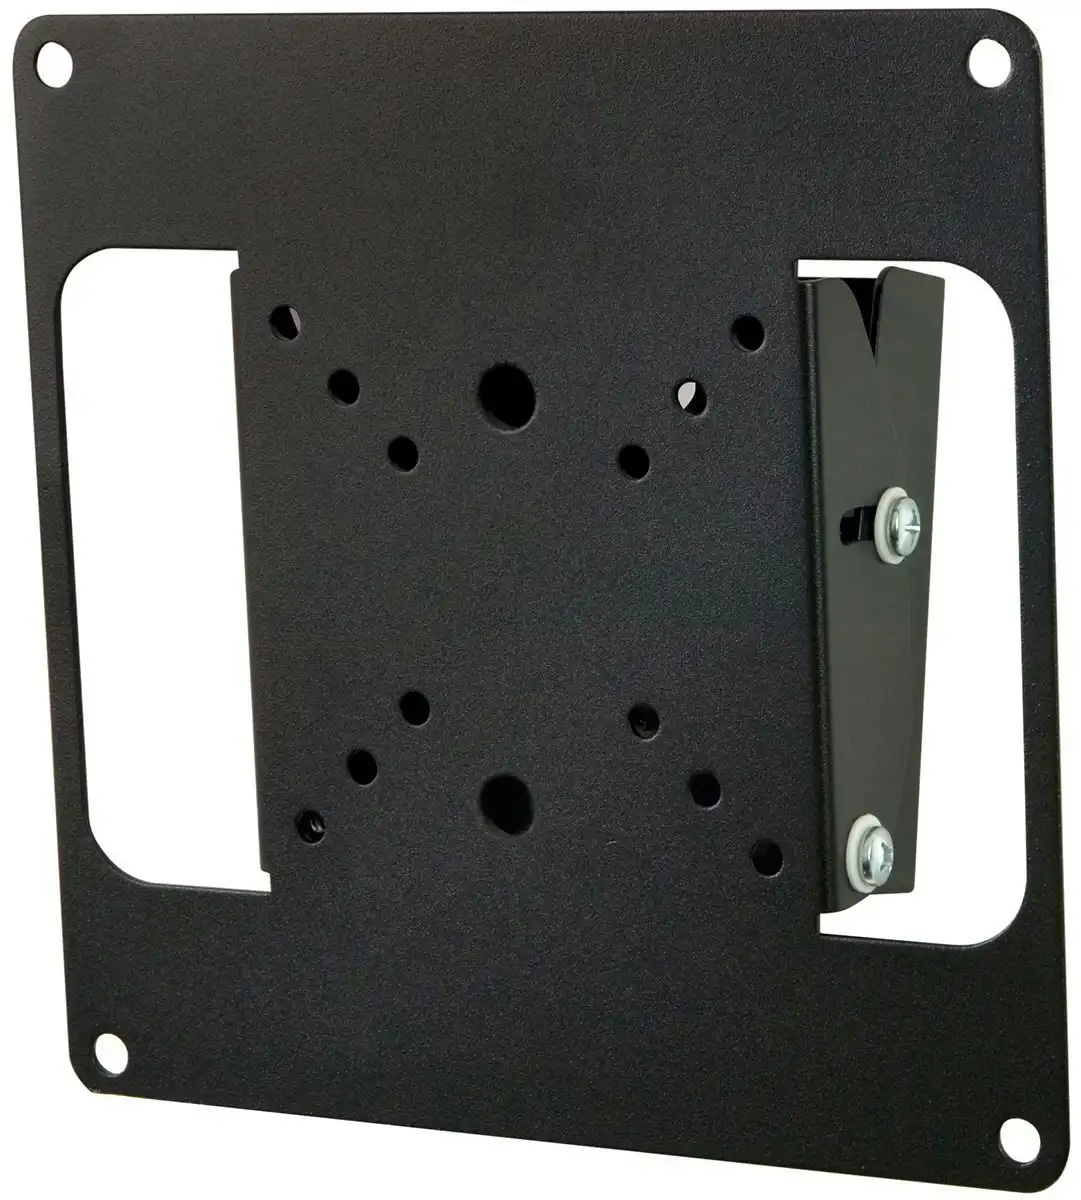 Crest Tilt Movement TV Wall Mount for 17 to 42 Inch TVs